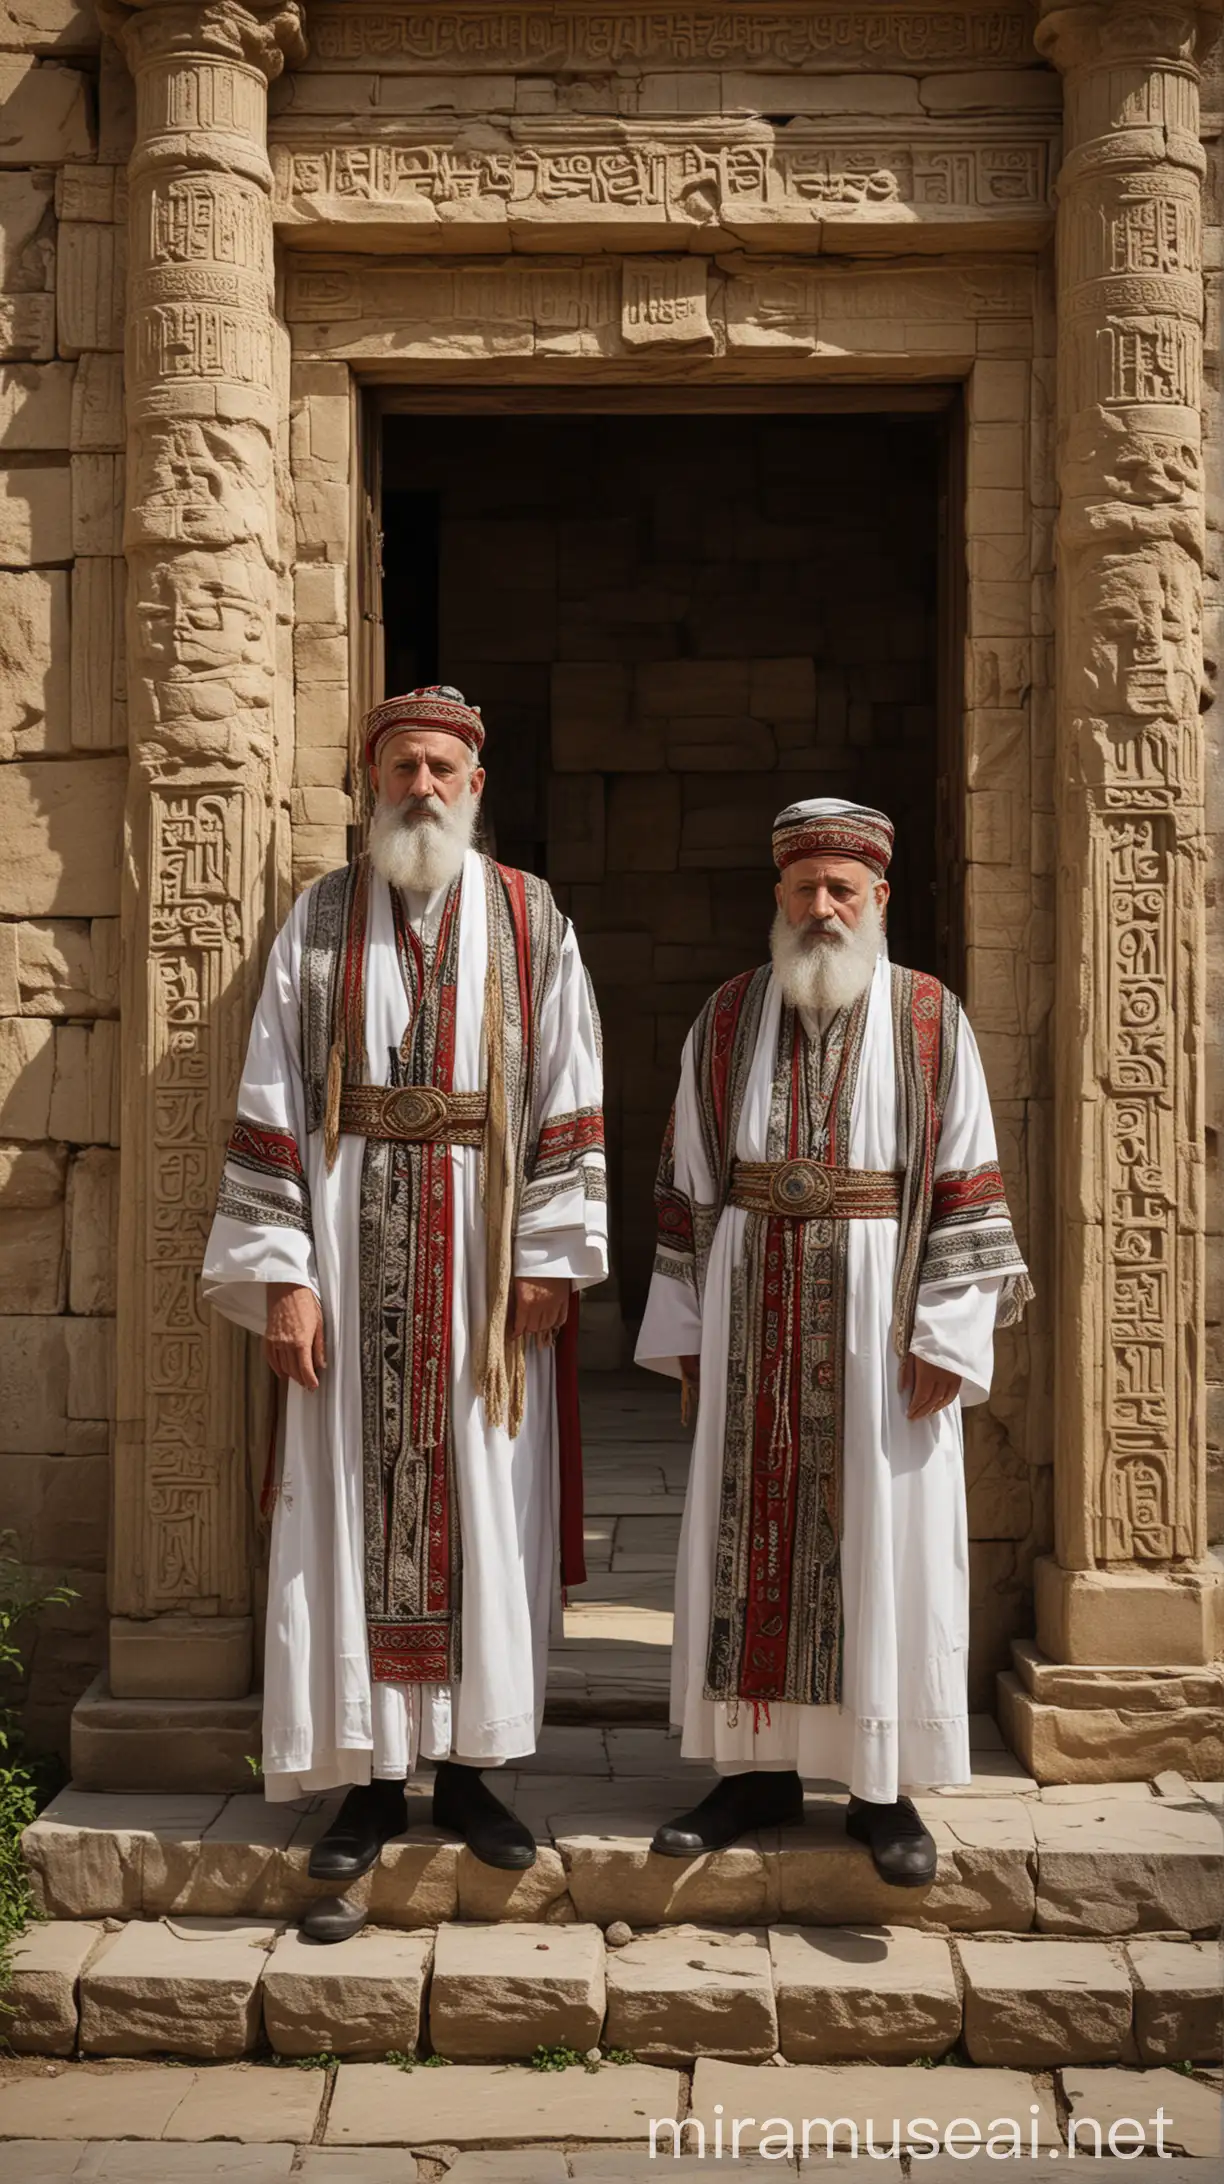 Illustrate a group of gatekeepers at the entrance of an ancient temple. The gatekeepers, dressed in Jewish traditional Levite garments, are standing vigilantly, symbolizing their important role in maintaining the sanctity of the temple."